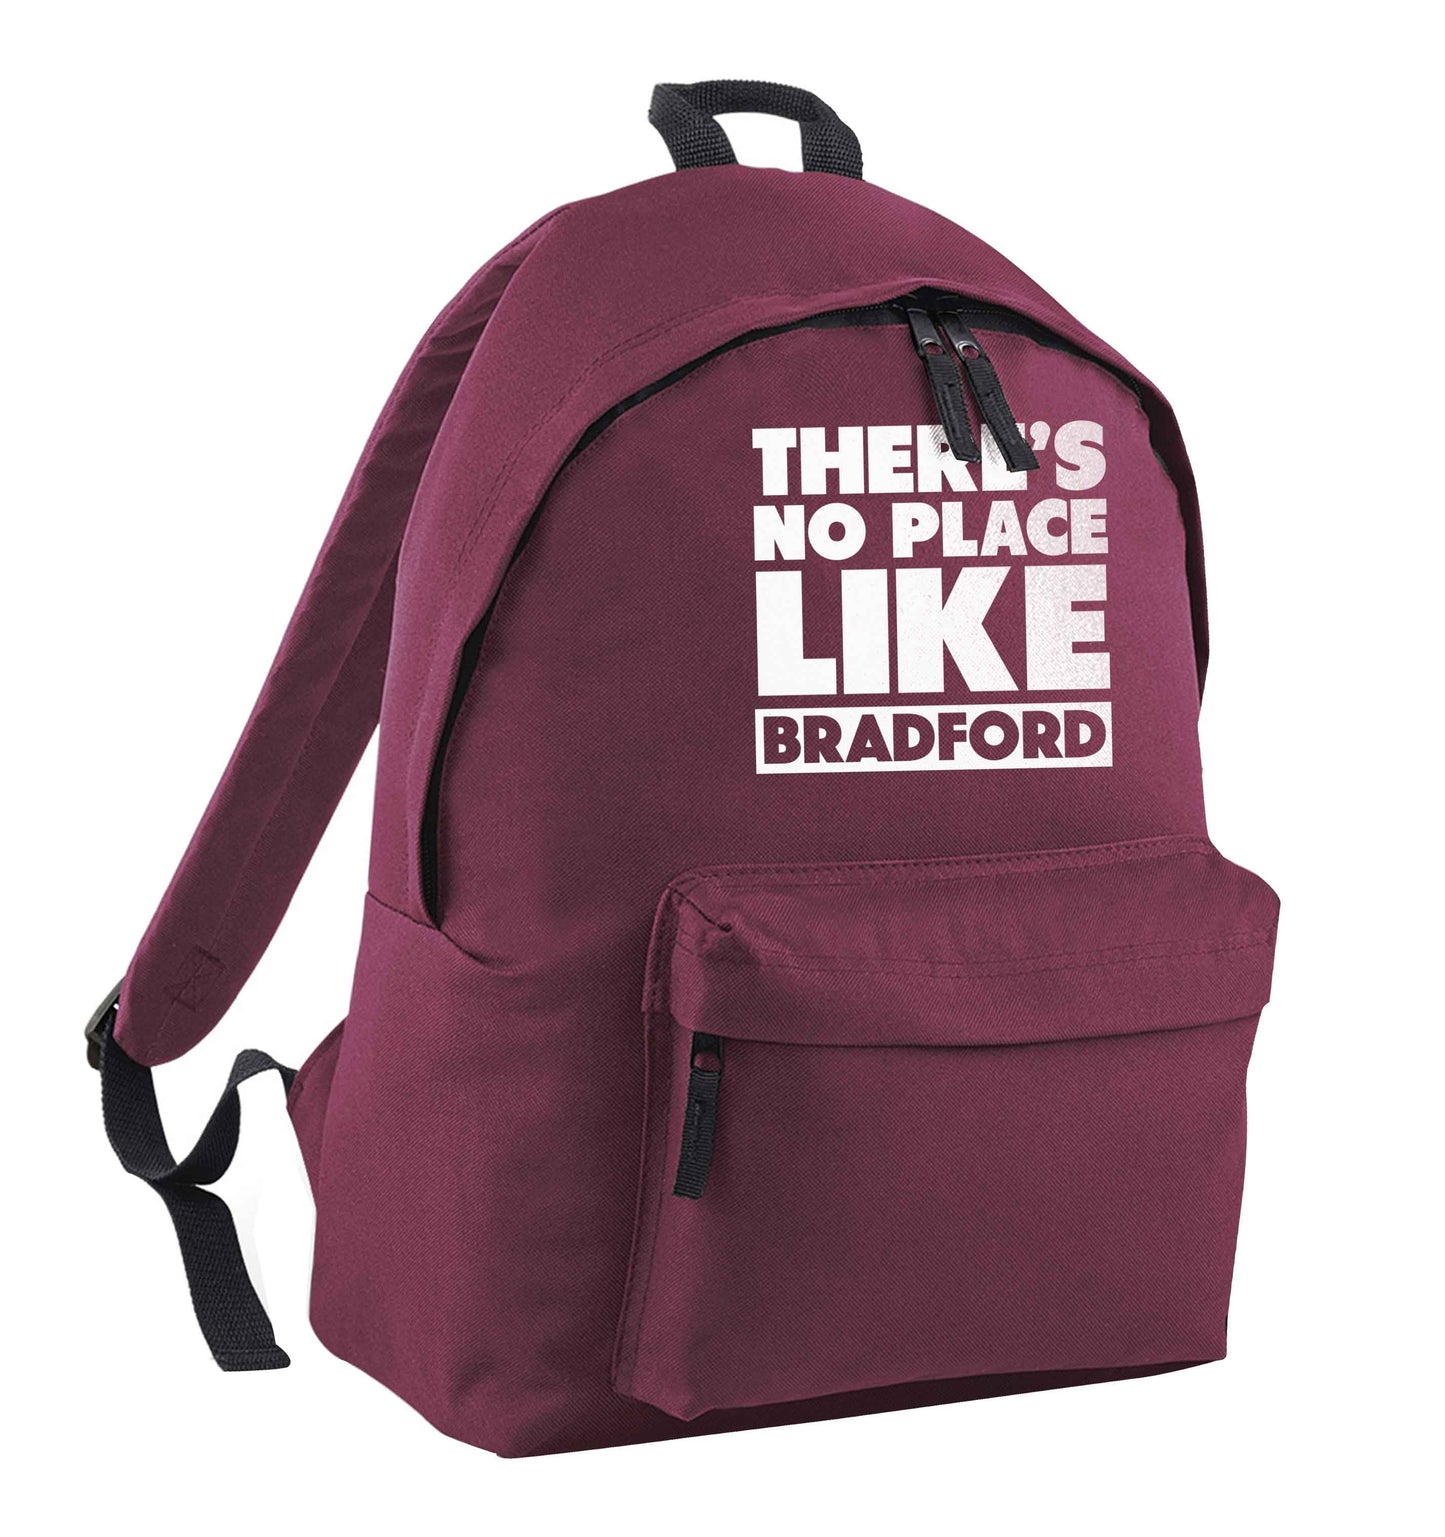 There's no place like Bradford maroon adults backpack